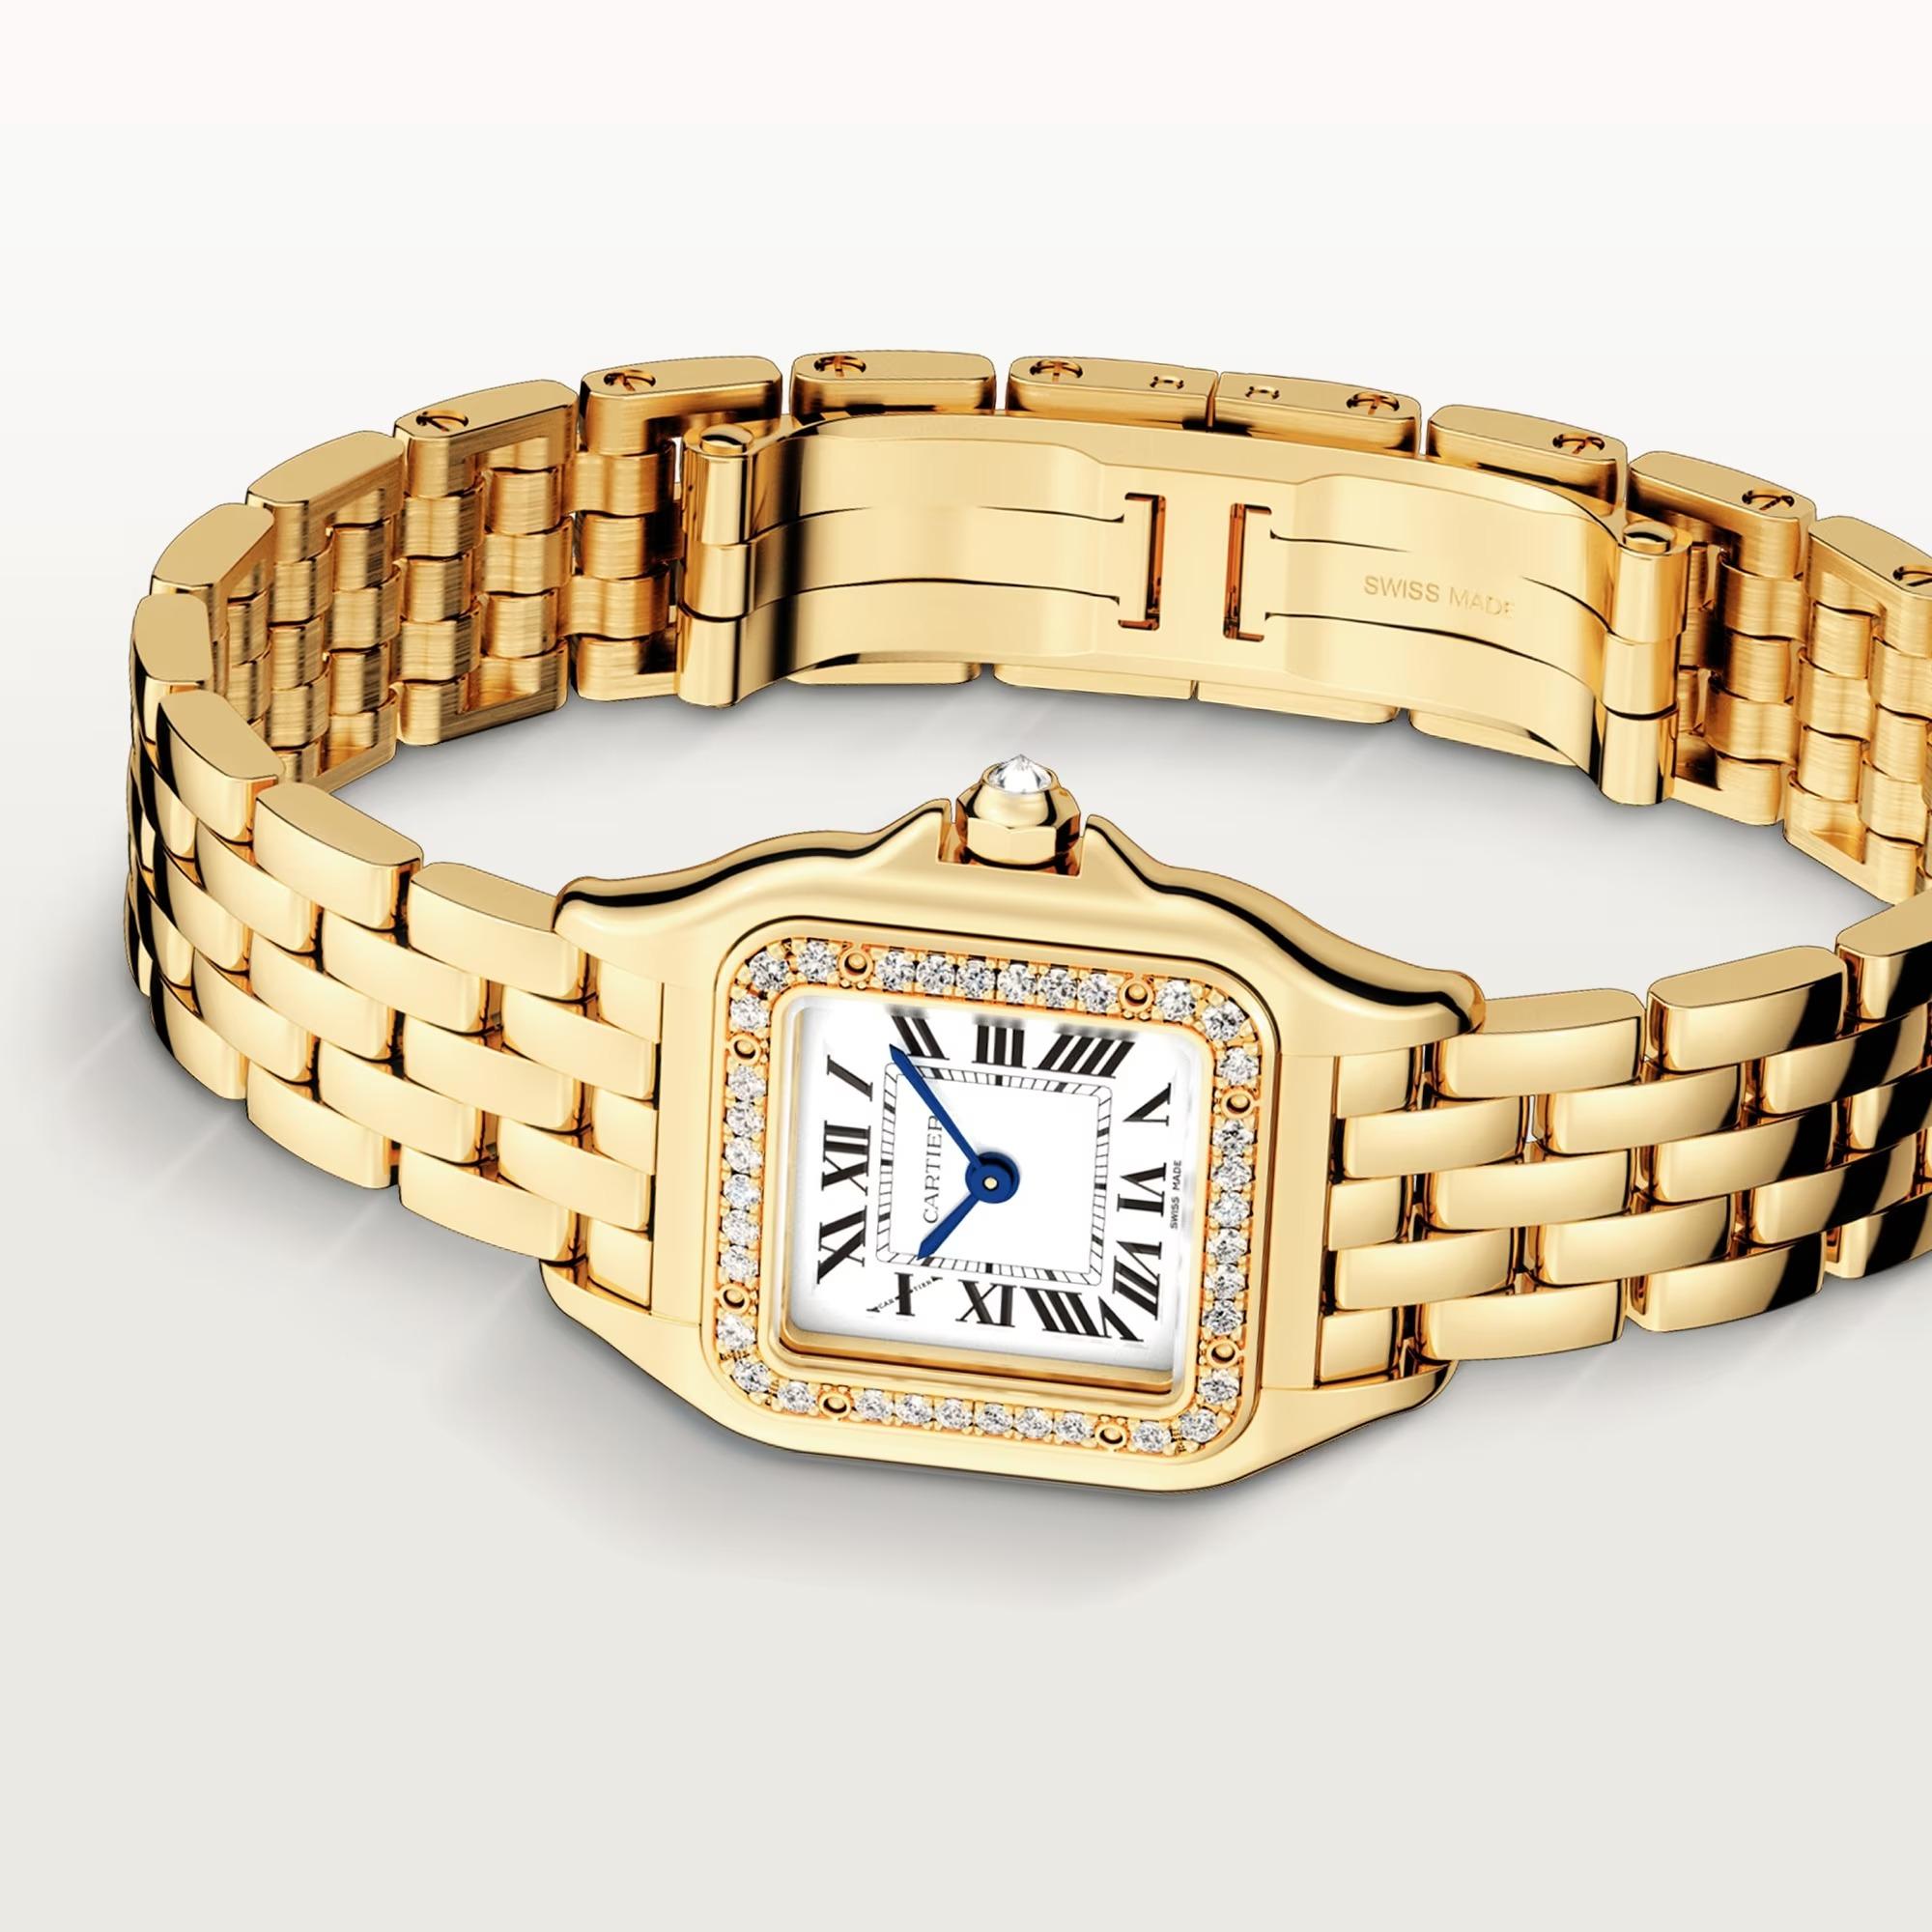 Panthere de Cartier Watch in Yellow Gold with Diamonds, small model 1